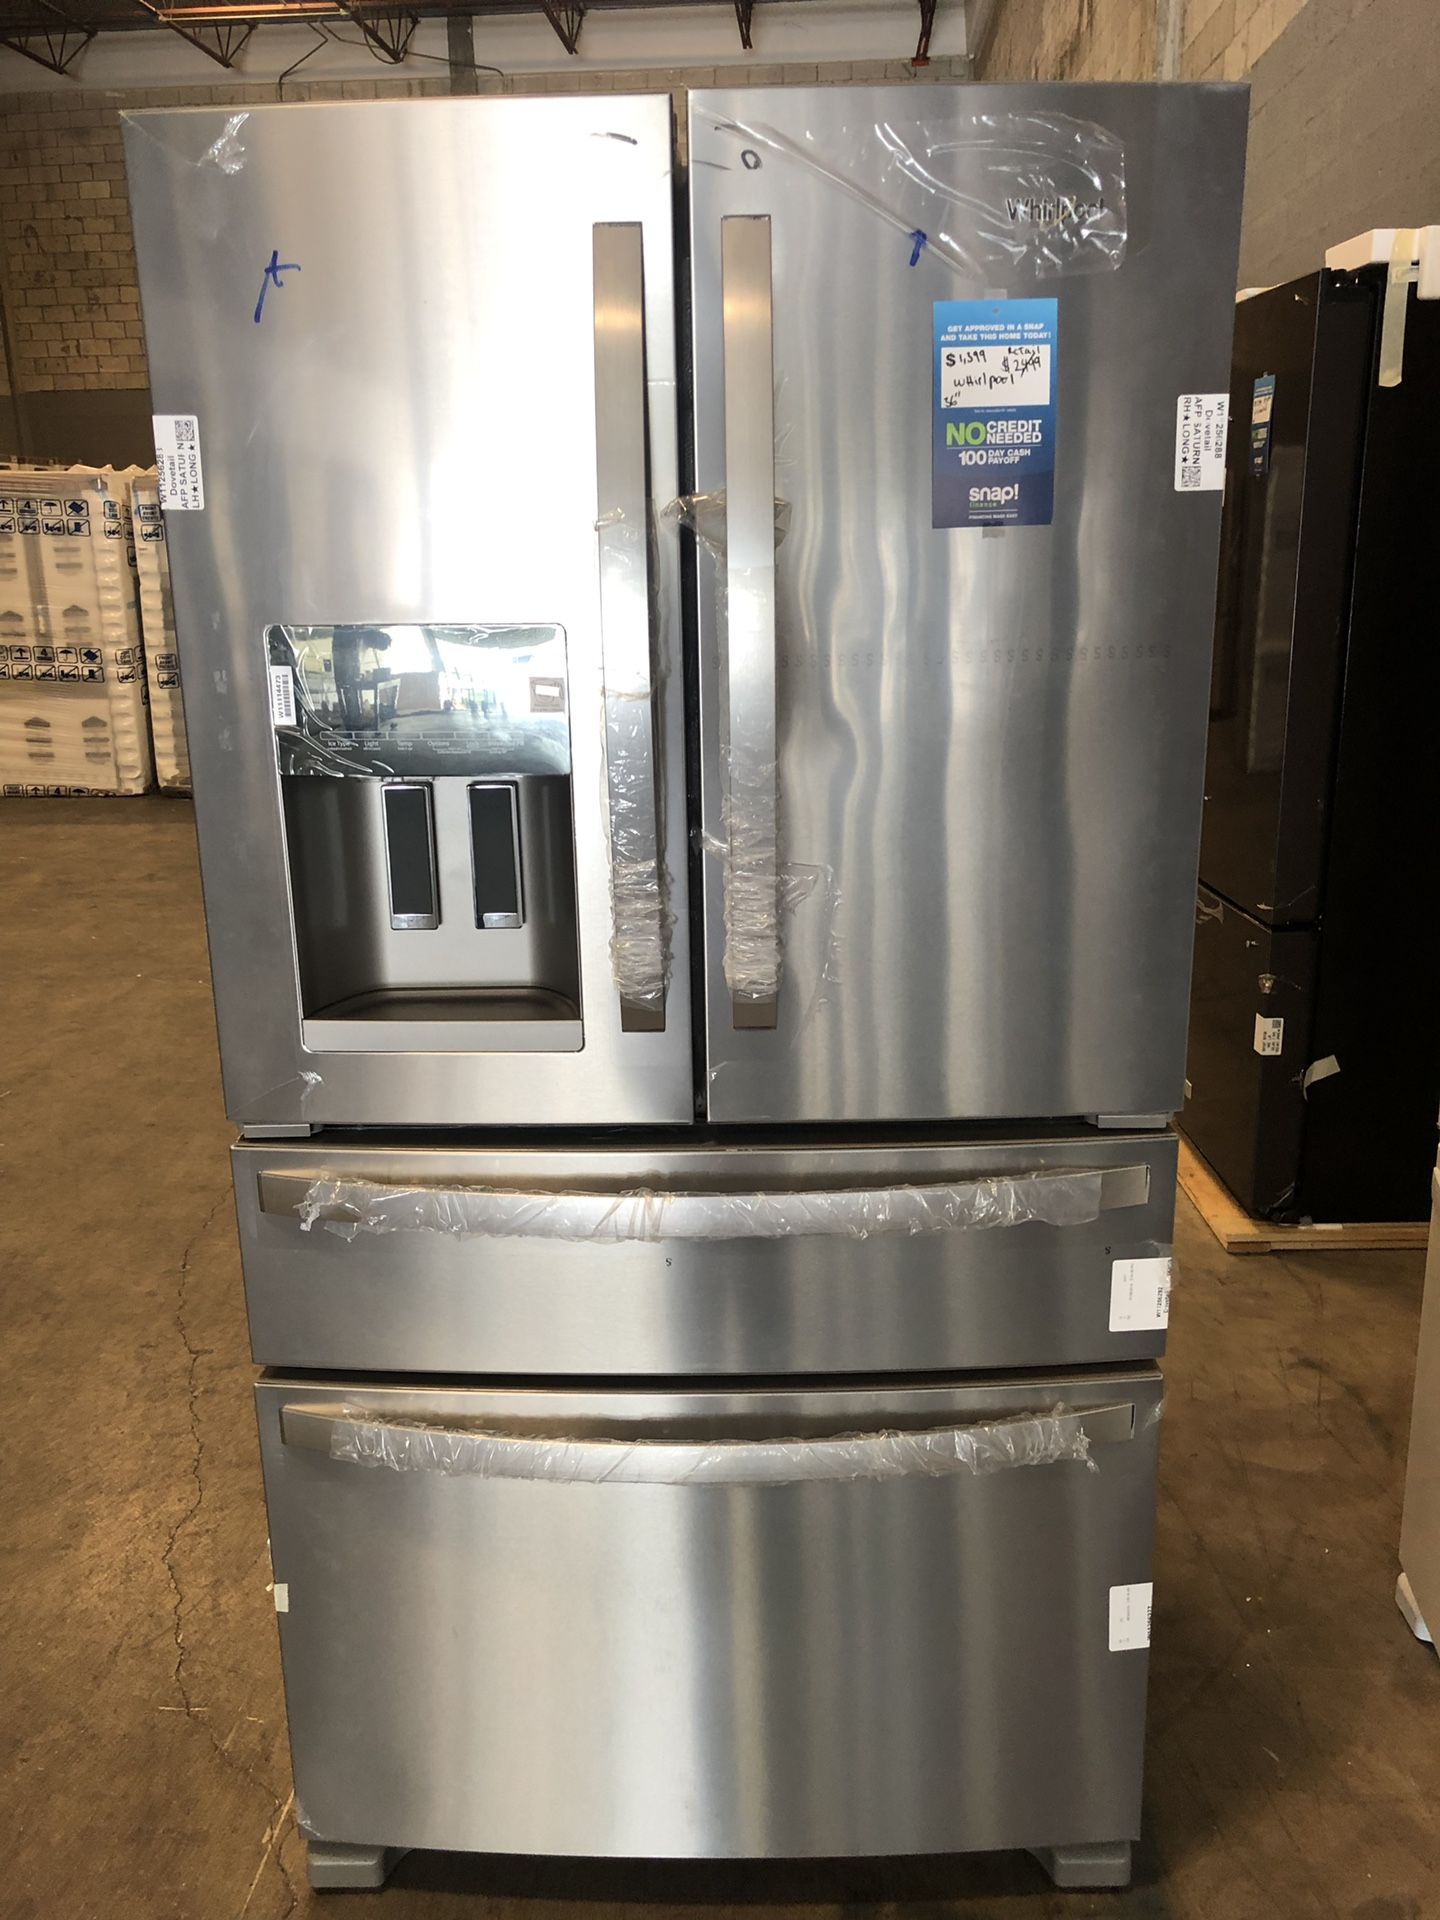 Whirlpool 25 cu. ft. French Door Refrigerator Fingerprint Resistant Stainless Steel take home with 1 year warranty $39 down EZ financing available